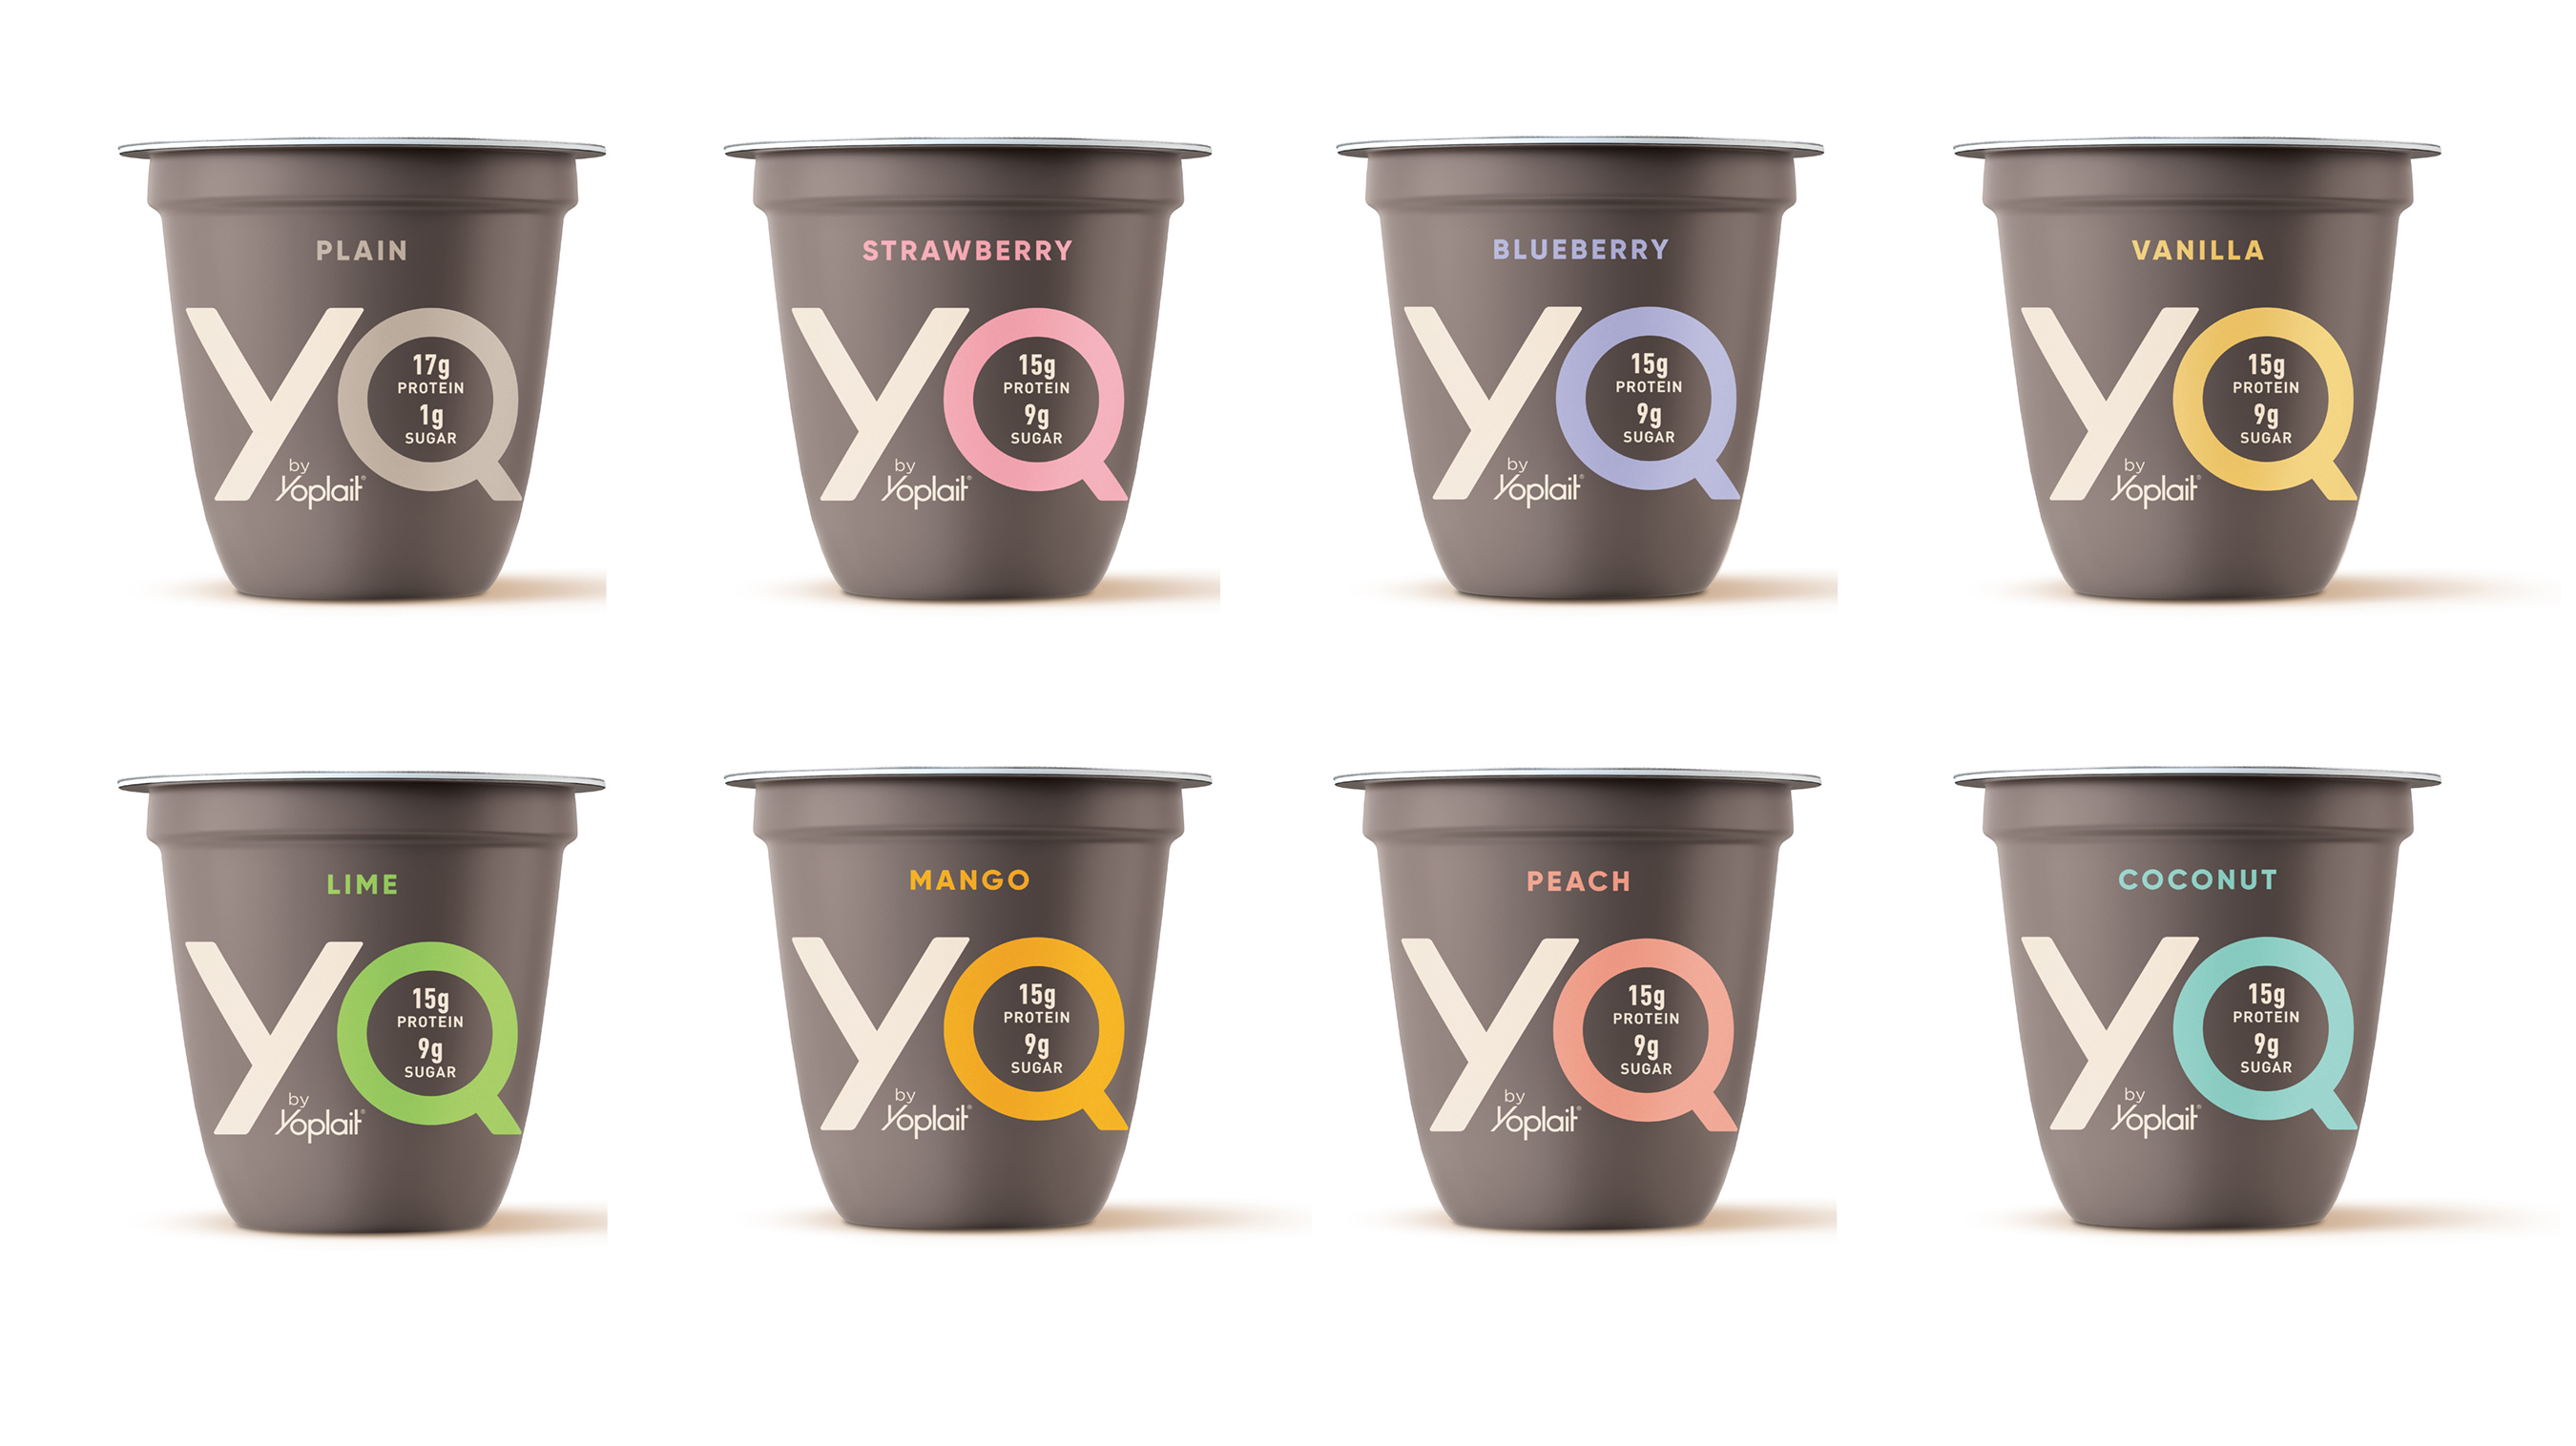 YQ by Yoplait is available in 8 flavors, including a Plain offering with 1-gram-sugar-per-serving that packs 17 grams of protein. The flavored varieties deliver 9 grams of sugar and 15 grams of protein per serving.